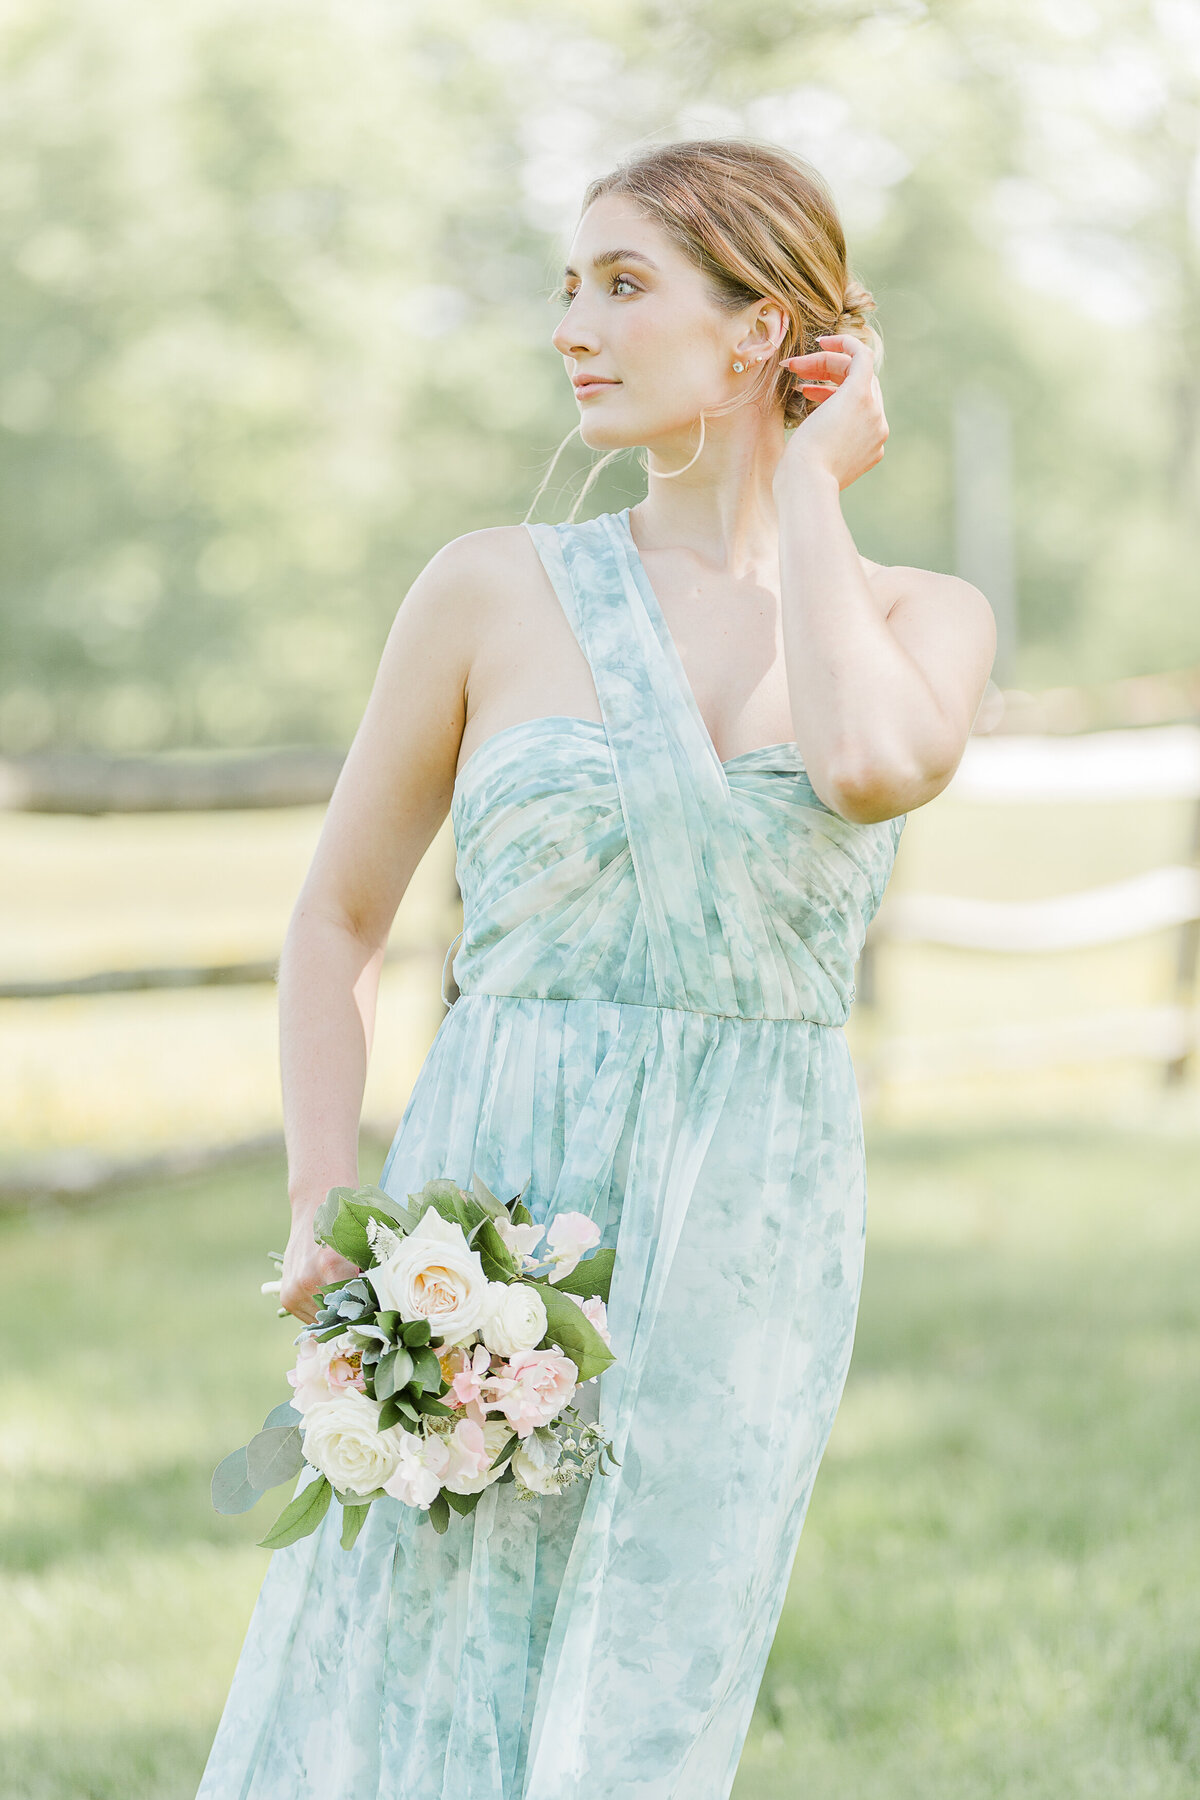 Bride in a patterned blue and cream organza dress is standing in a field for a portrait. Captured by top RI wedding photographer Lia Rose Weddings.